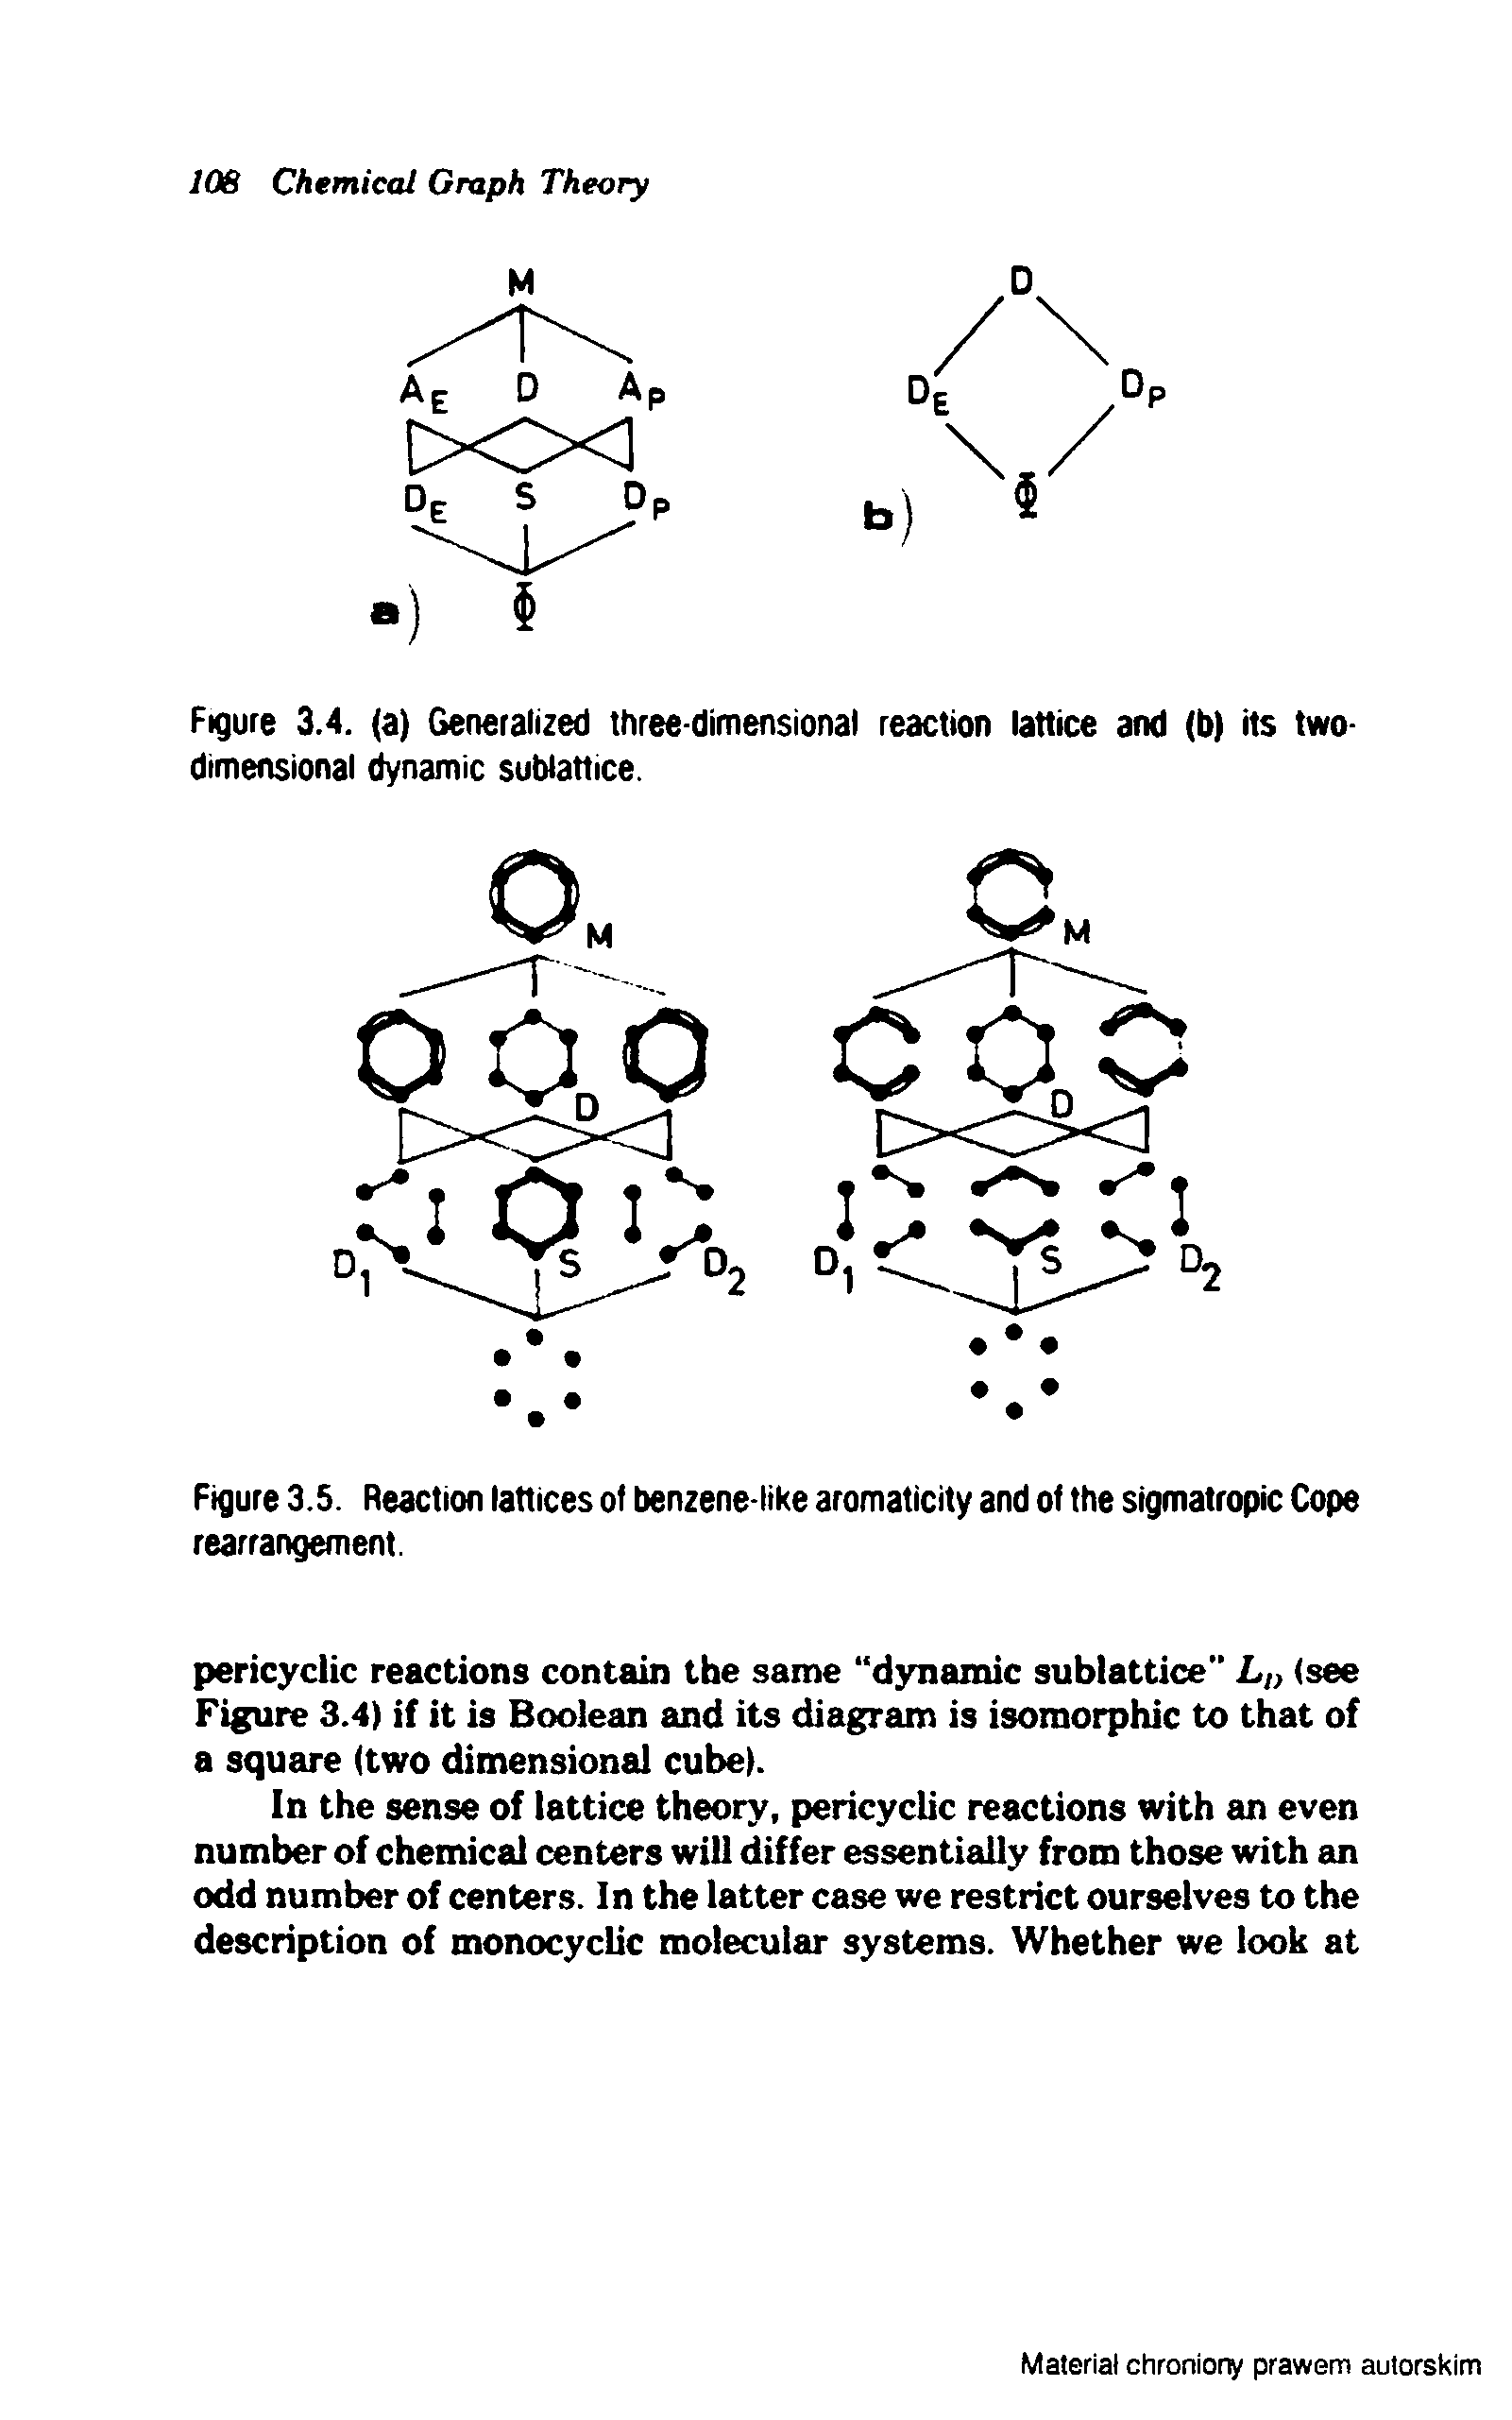 Figure 3.5. Reaction lattices of benzene like aromaticity and of the sigmatropic Cope rearrangement.